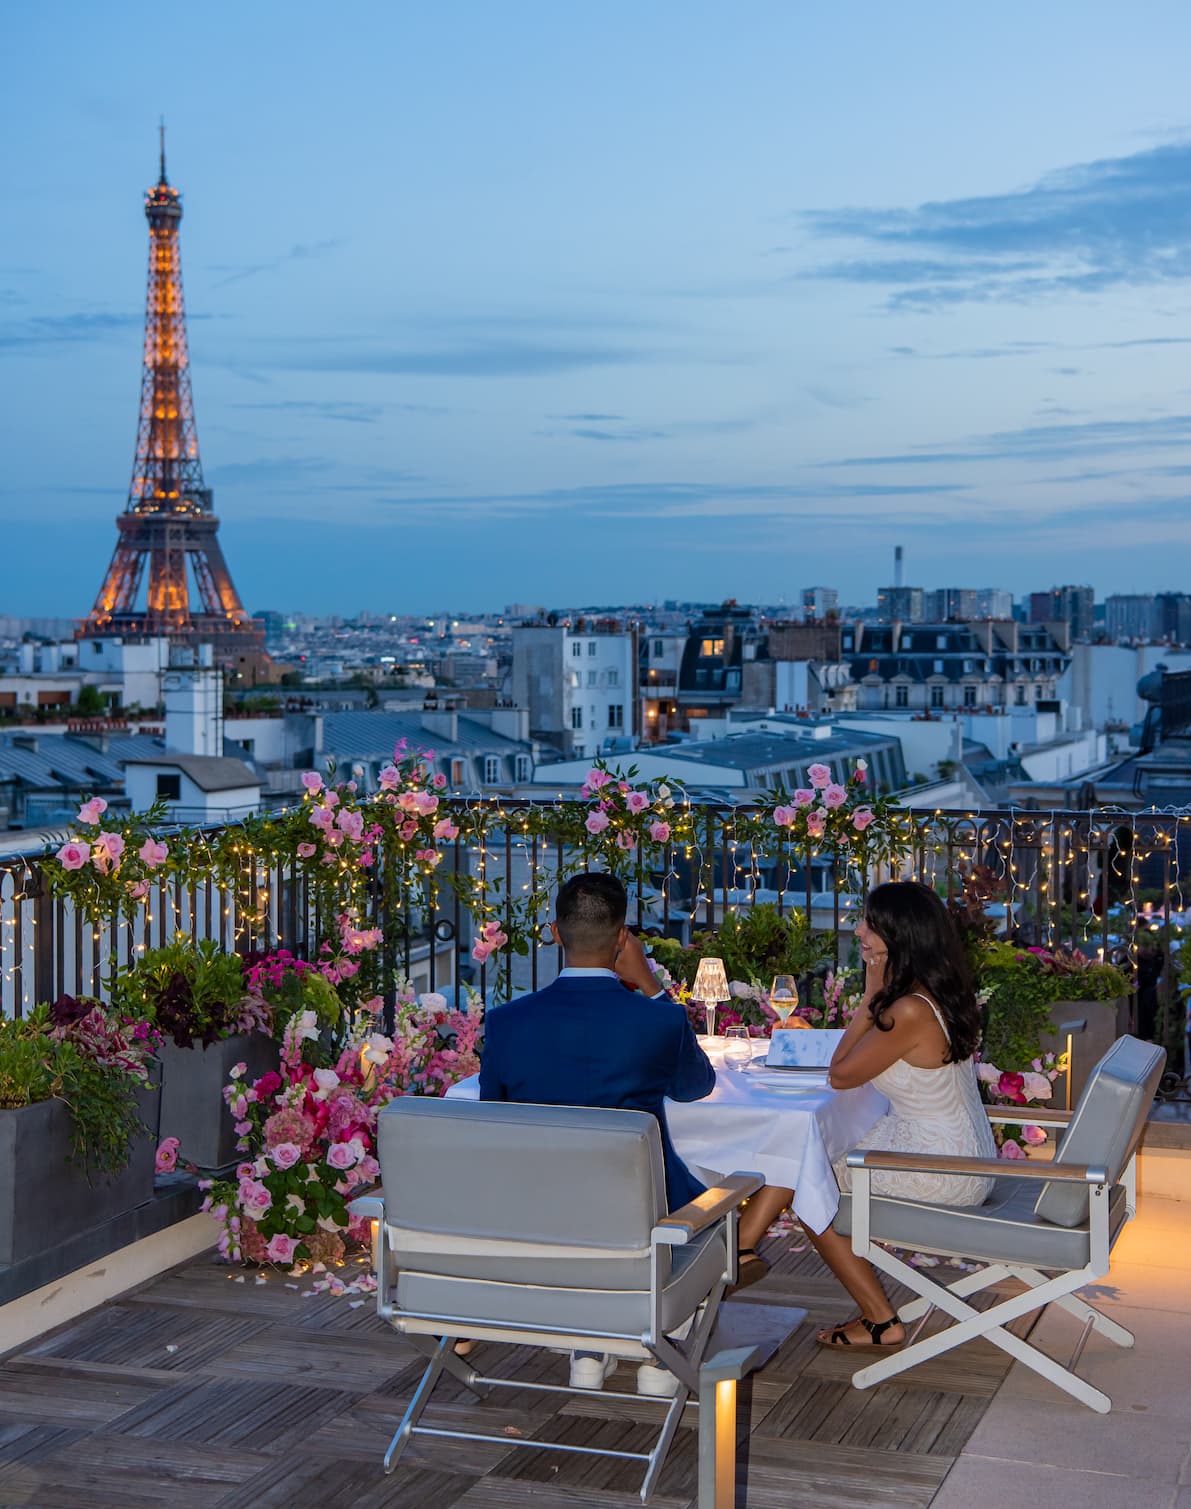 romantic private diner on a rooftop with an Eiffel Tower view